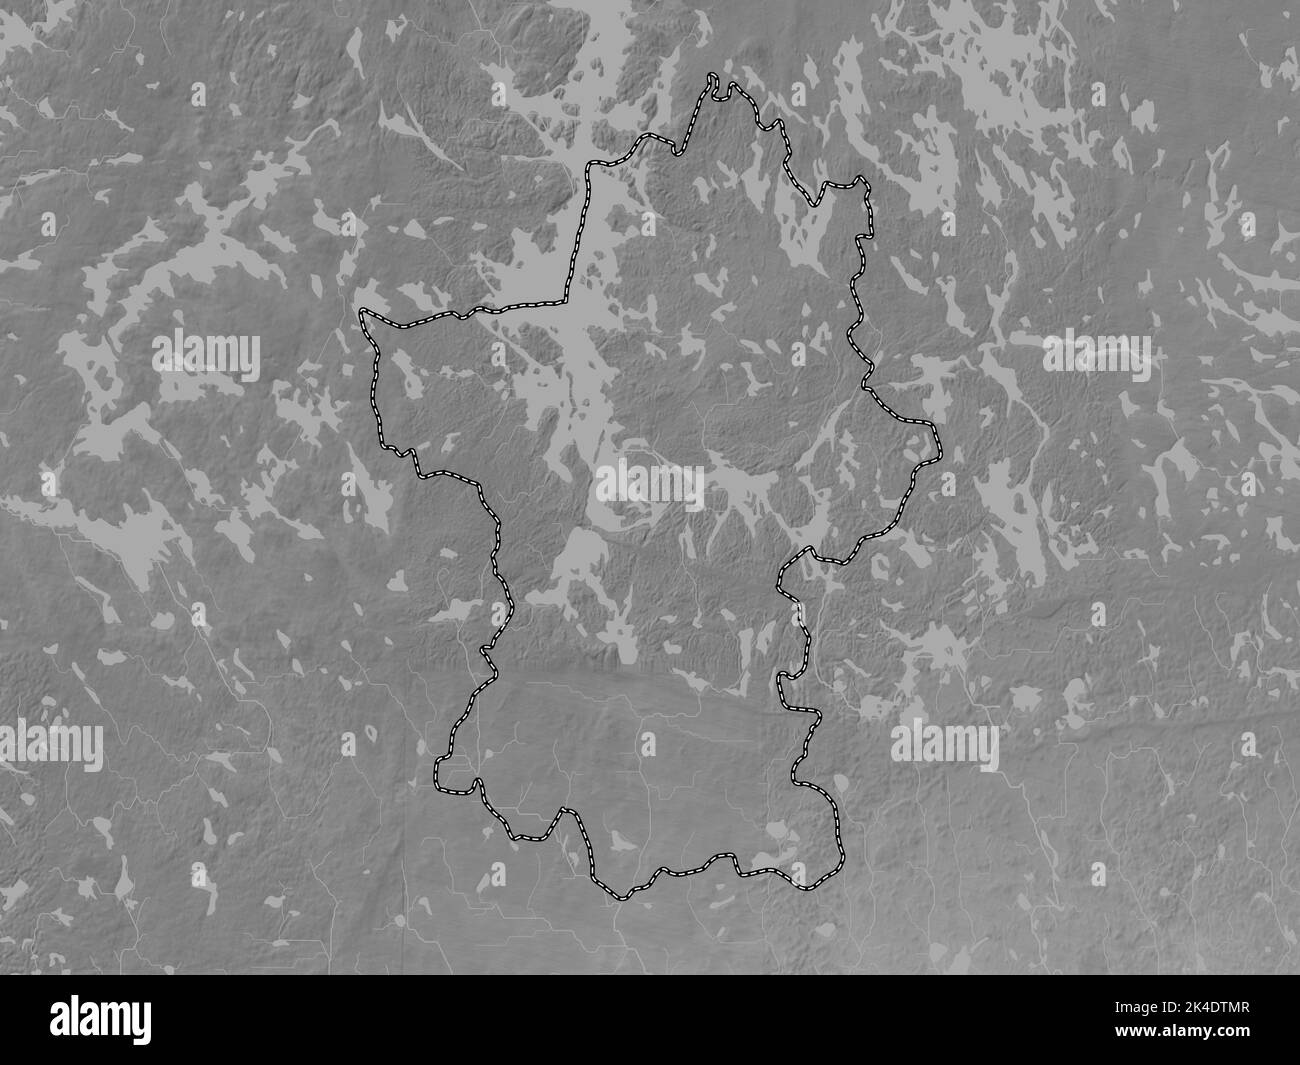 Paijanne Tavastia, region of Finland. Grayscale elevation map with lakes and rivers Stock Photo